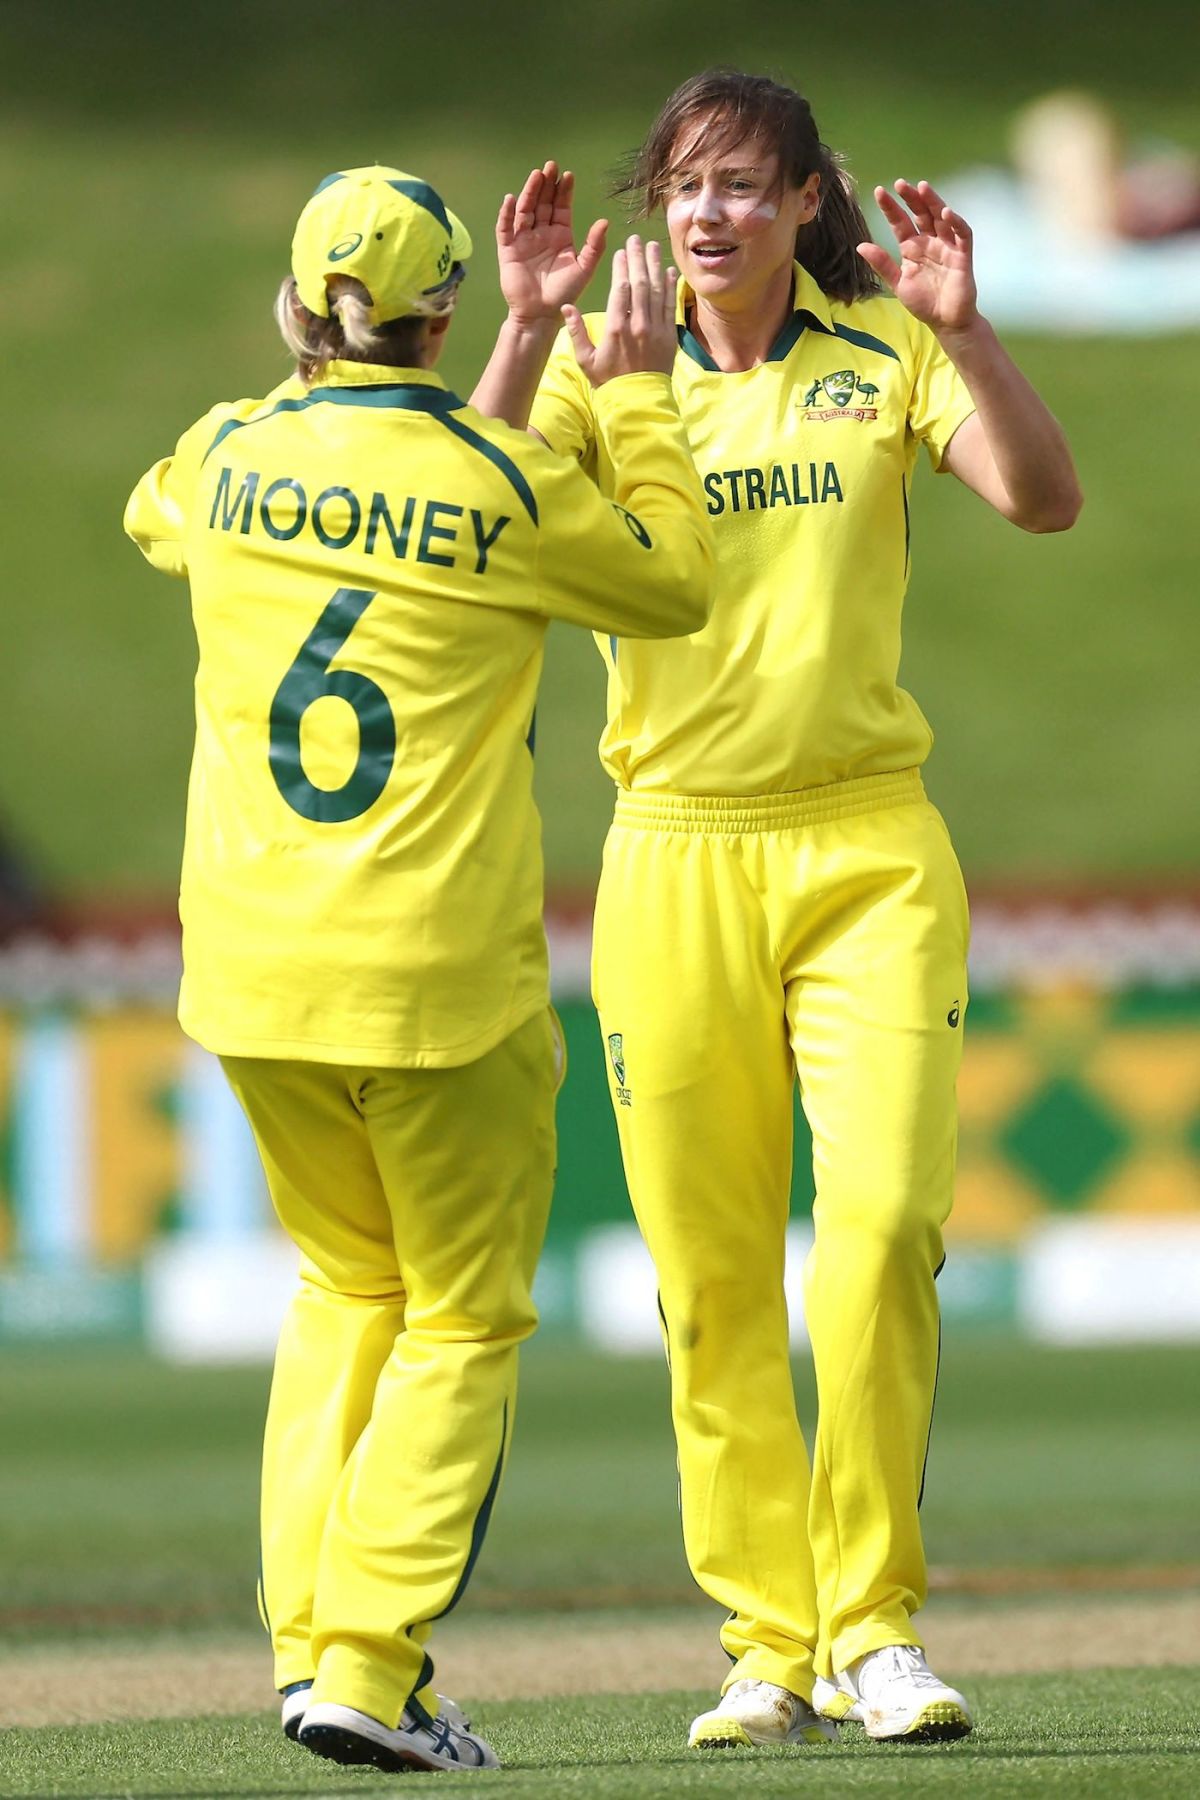 Women's World Cup: More I bowl, the better is rhythm, says Ellyse Perry 